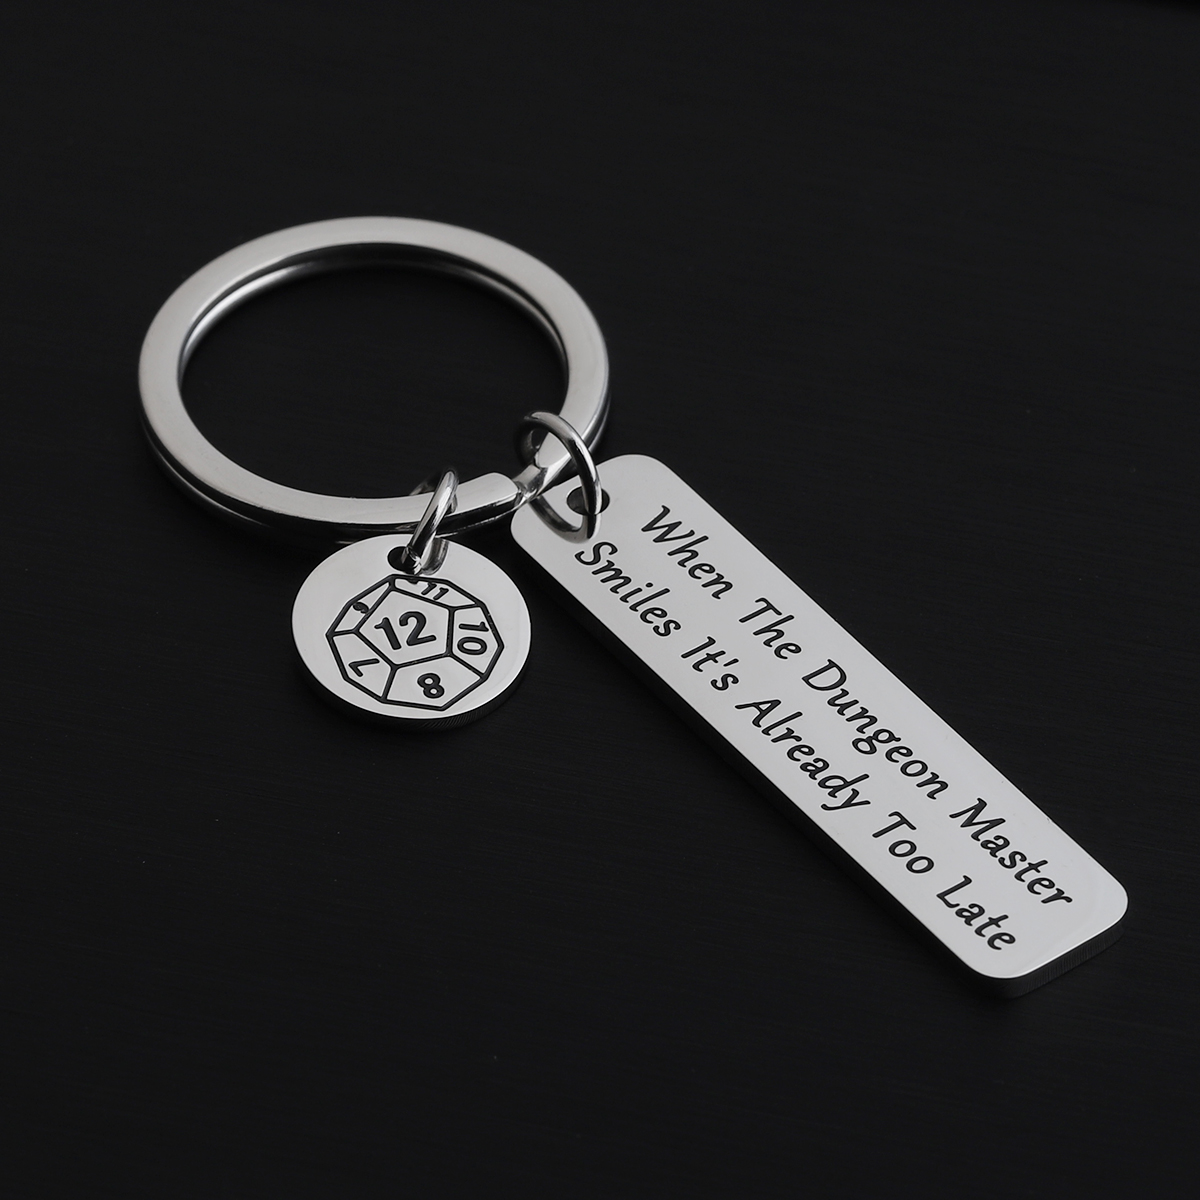 When The Dungeon Master Smiles It's Already Too Late Keychain Dungeon Master Gift Funny Dungeons and Dragons Gifts - image 4 of 5